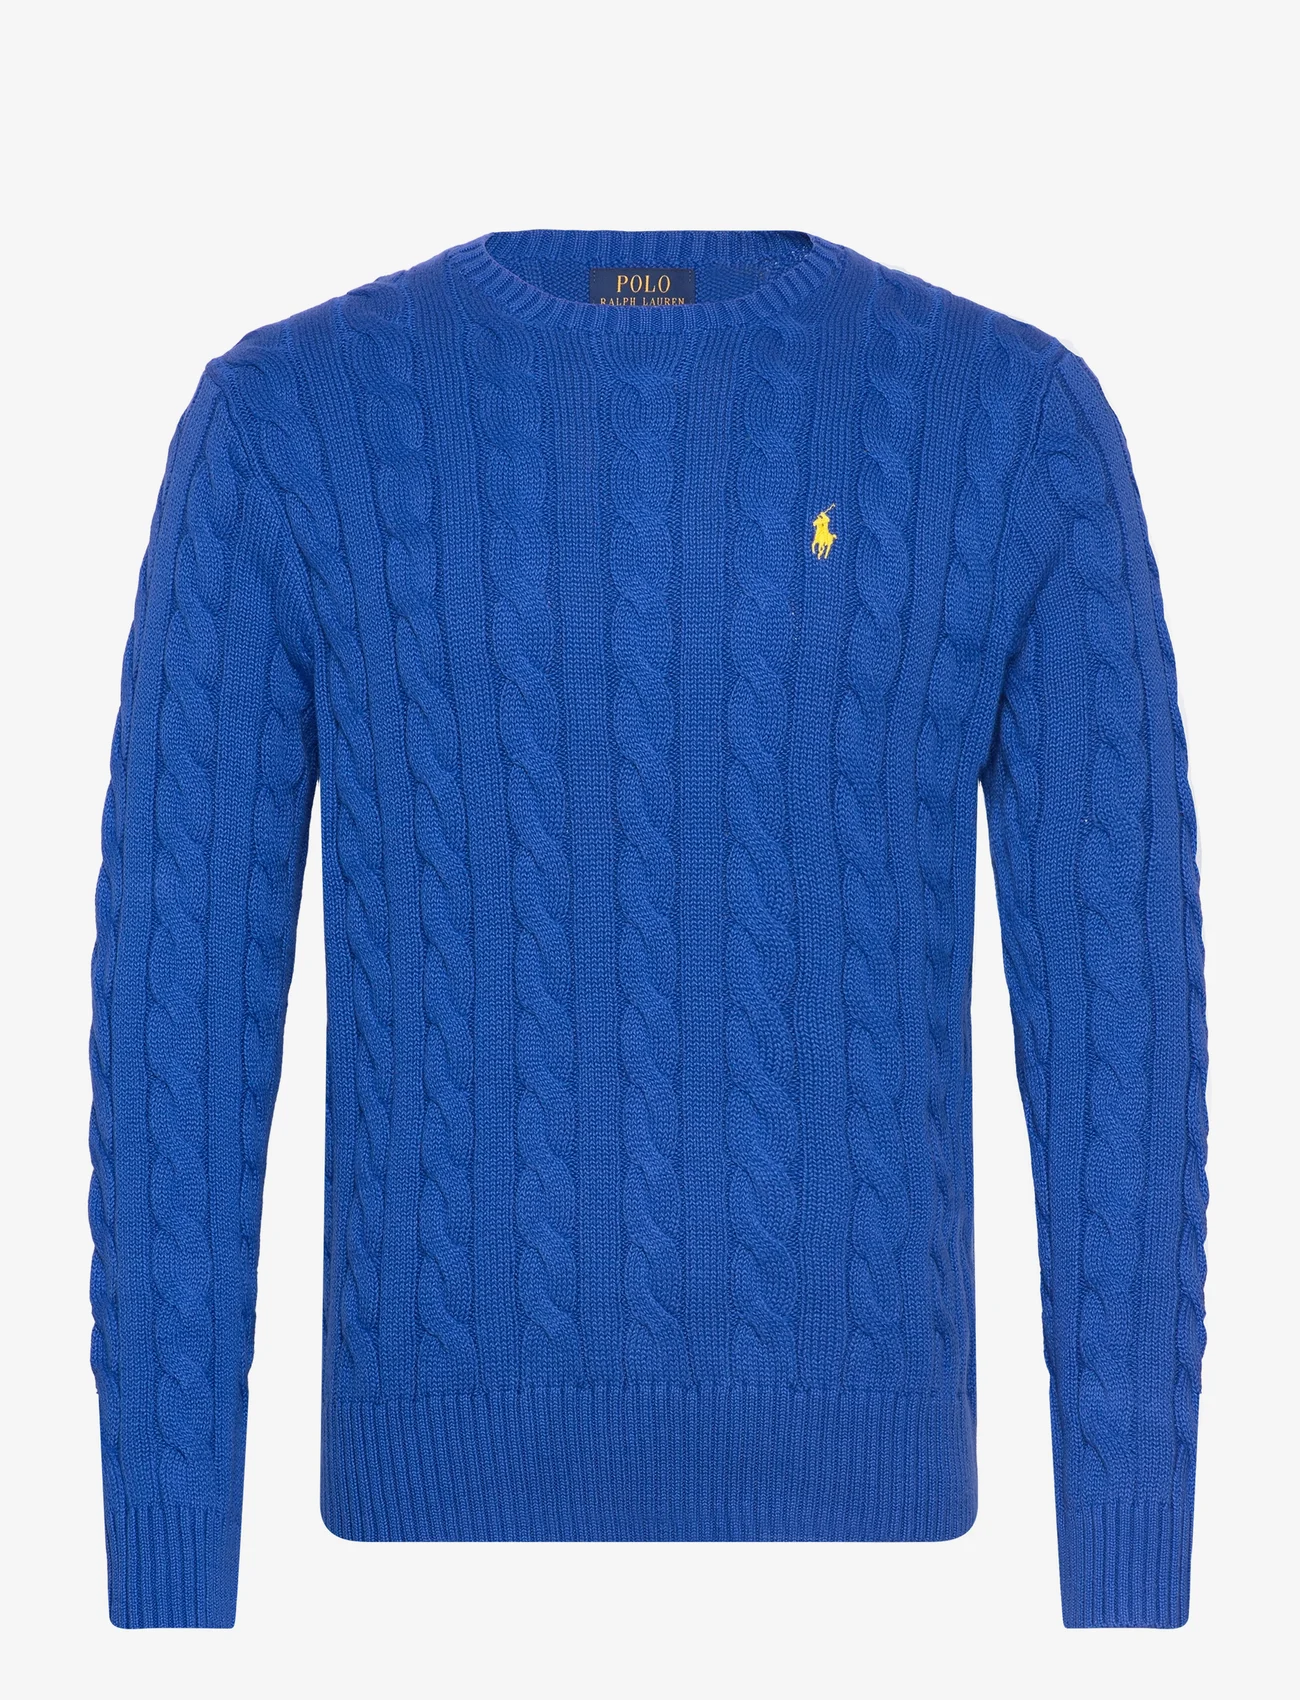 Polo Ralph Lauren - Cable-Knit Cotton Sweater - rund hals - heritage blue - 0